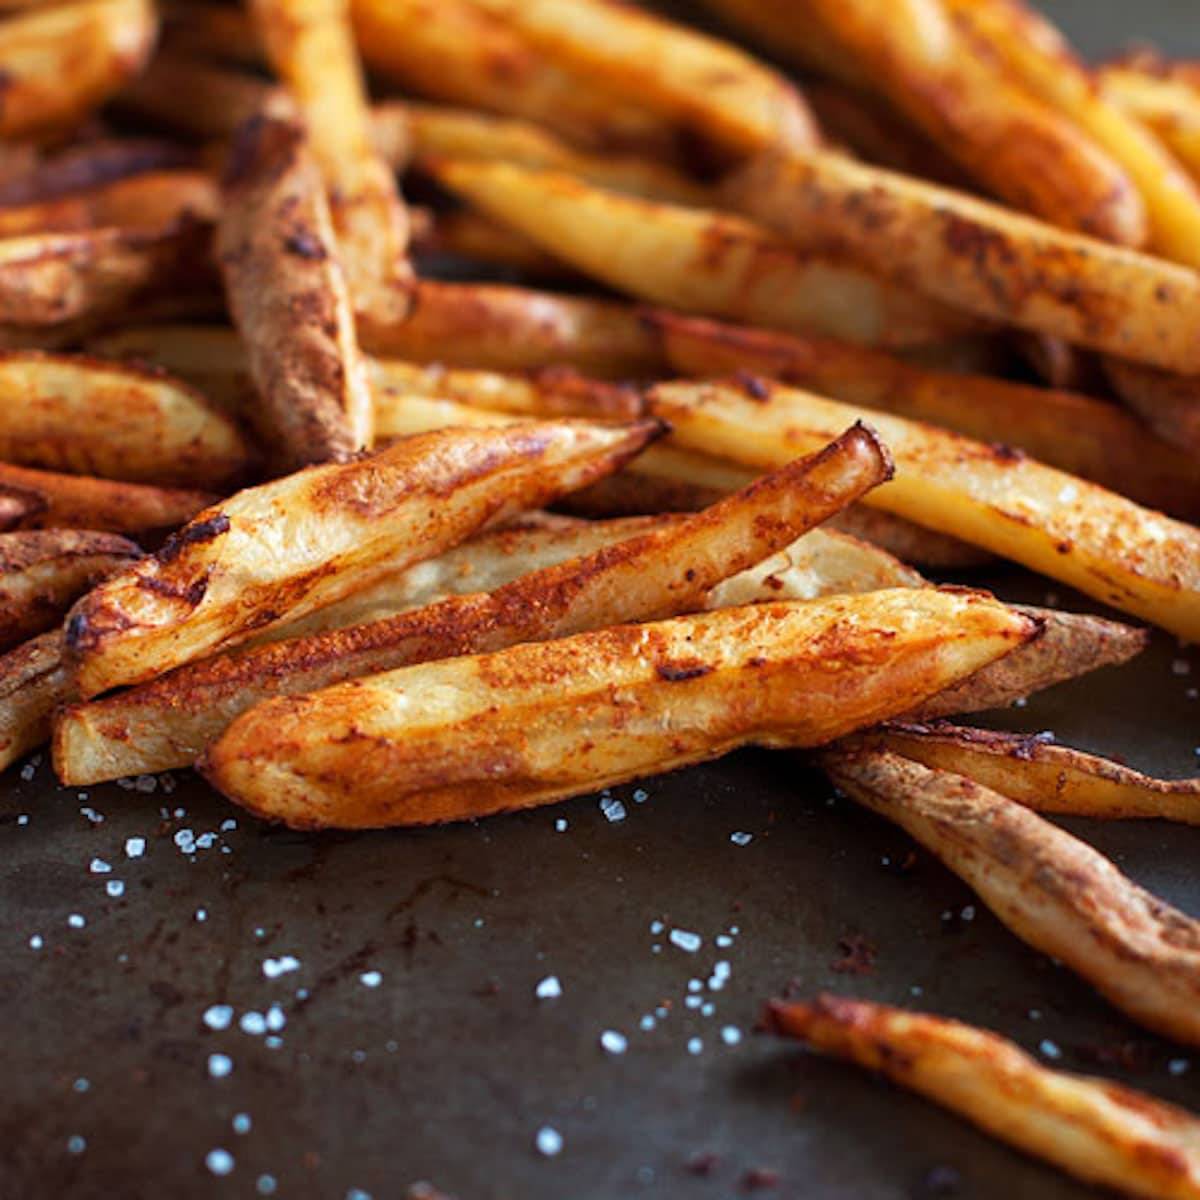 Baked spicy fries.